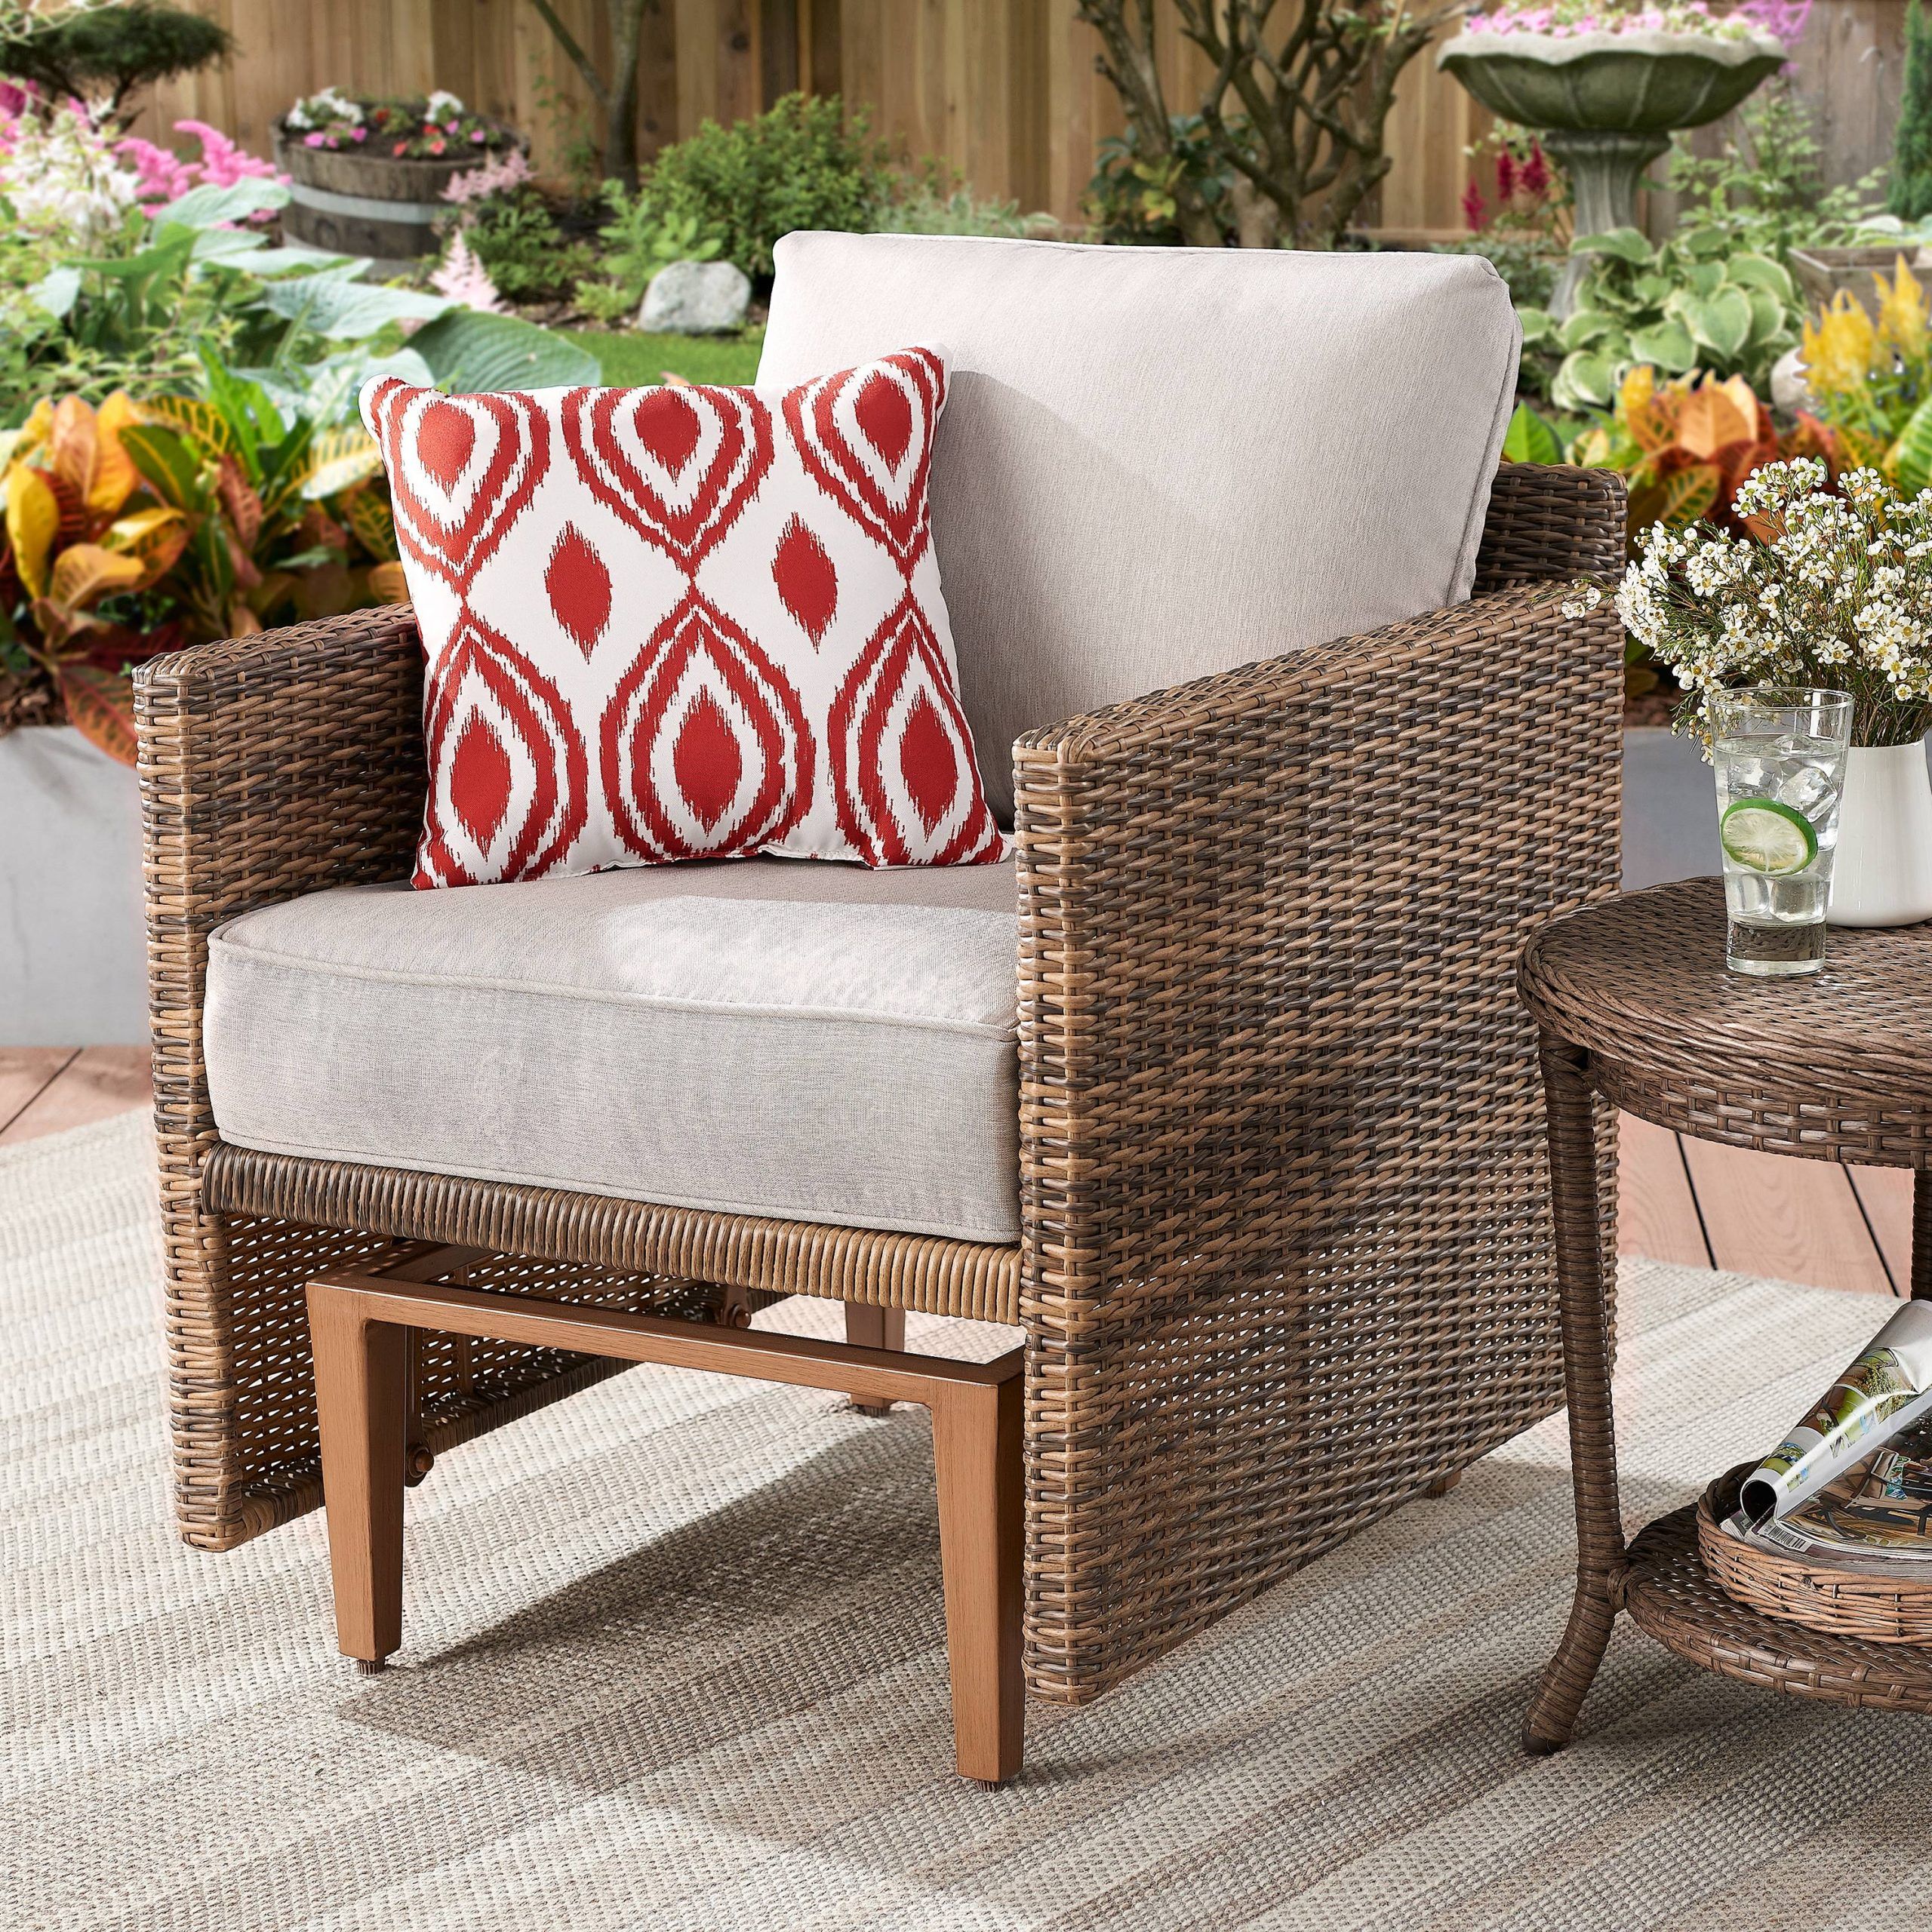 Better Homes & Gardens Davenport Patio Wicker Glider Chair With Beige Within Rattan Wicker Outdoor Seating Sets (View 5 of 15)